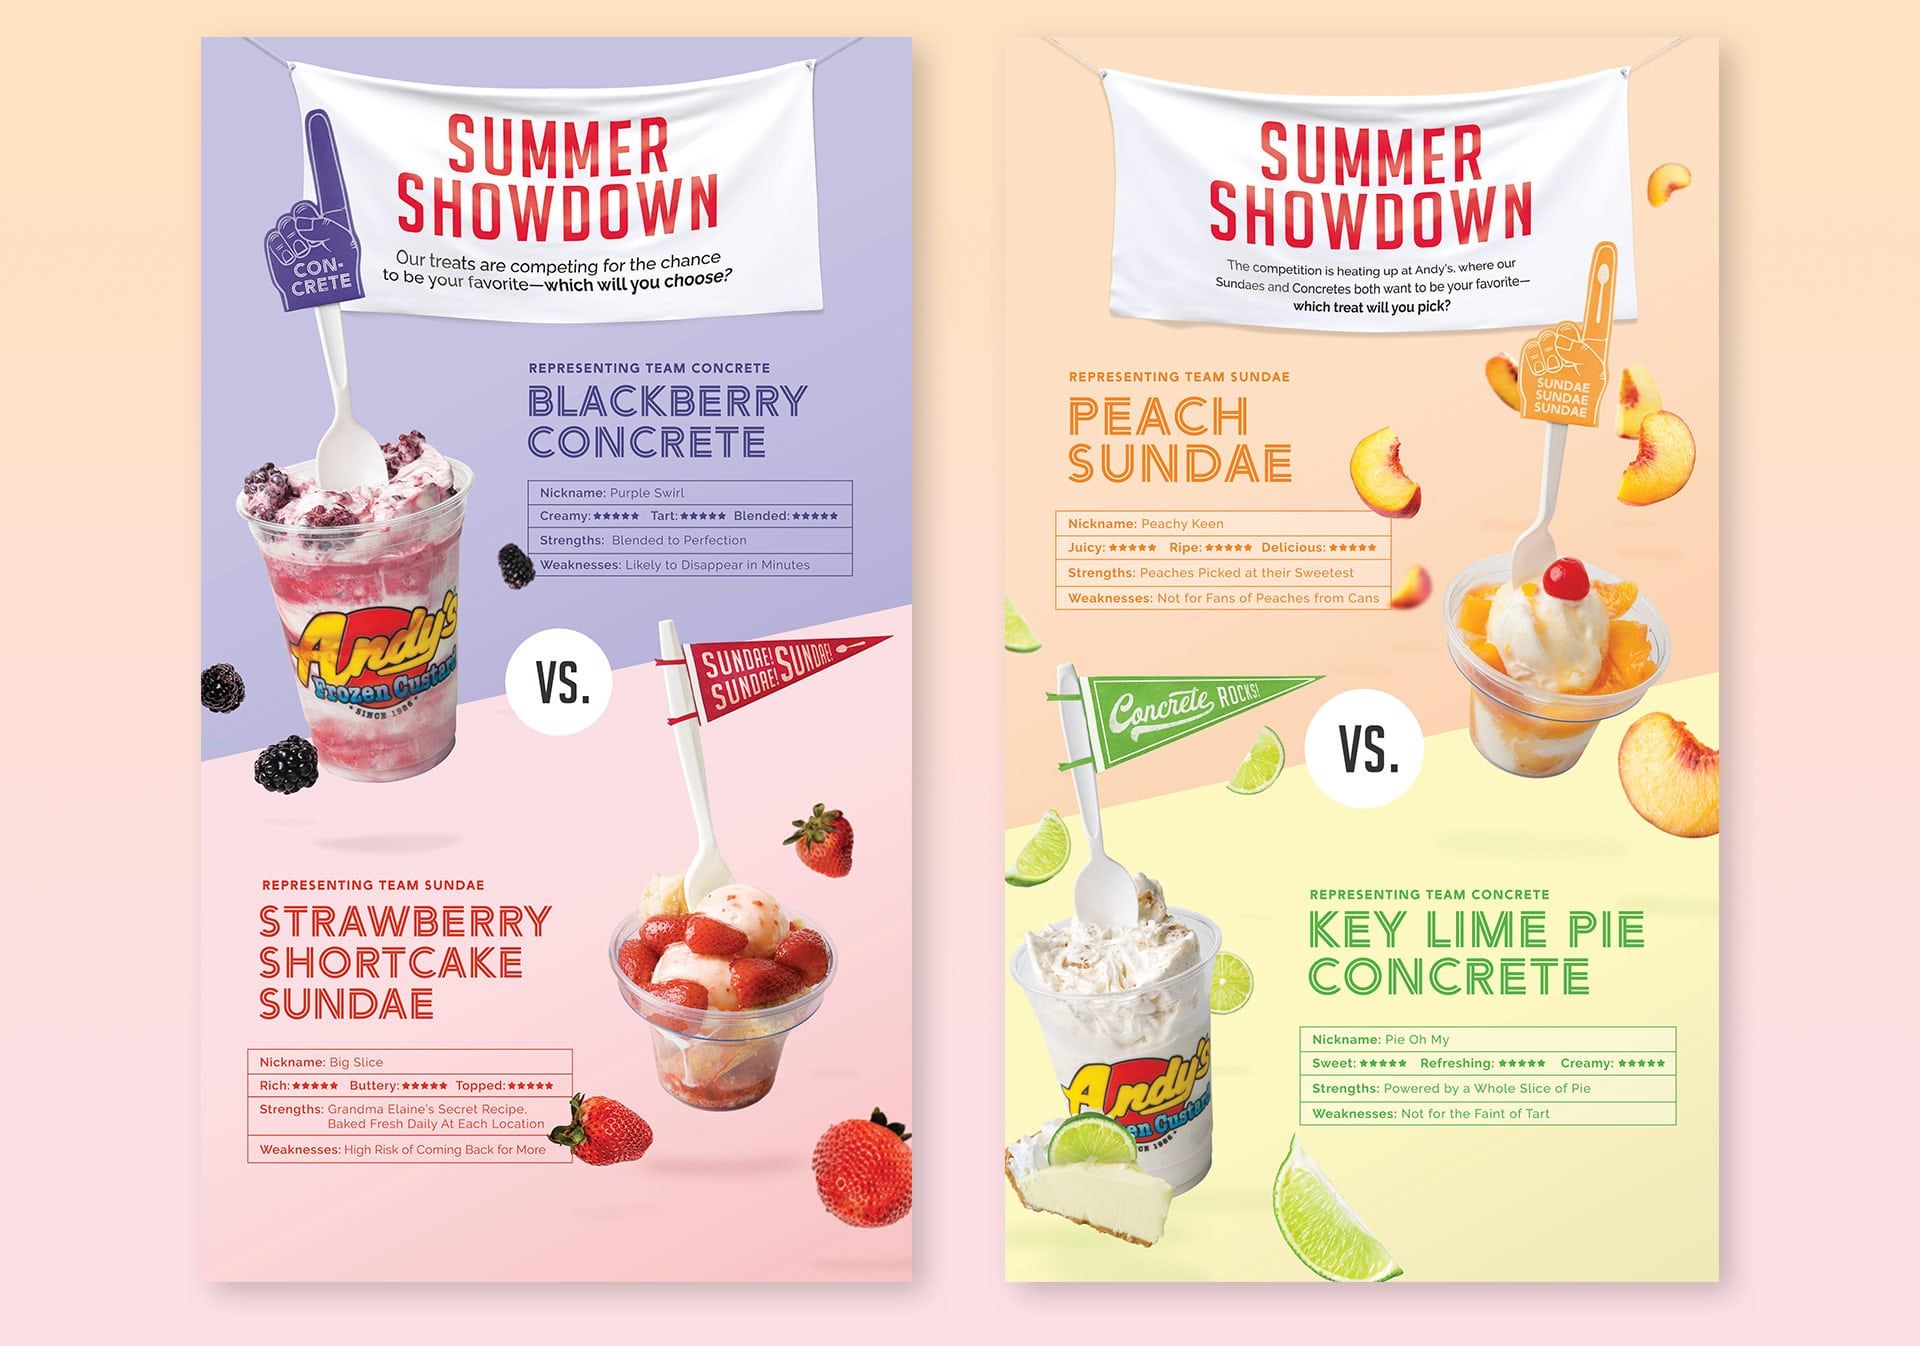 Andy's Summer Showdown Promotional Posters